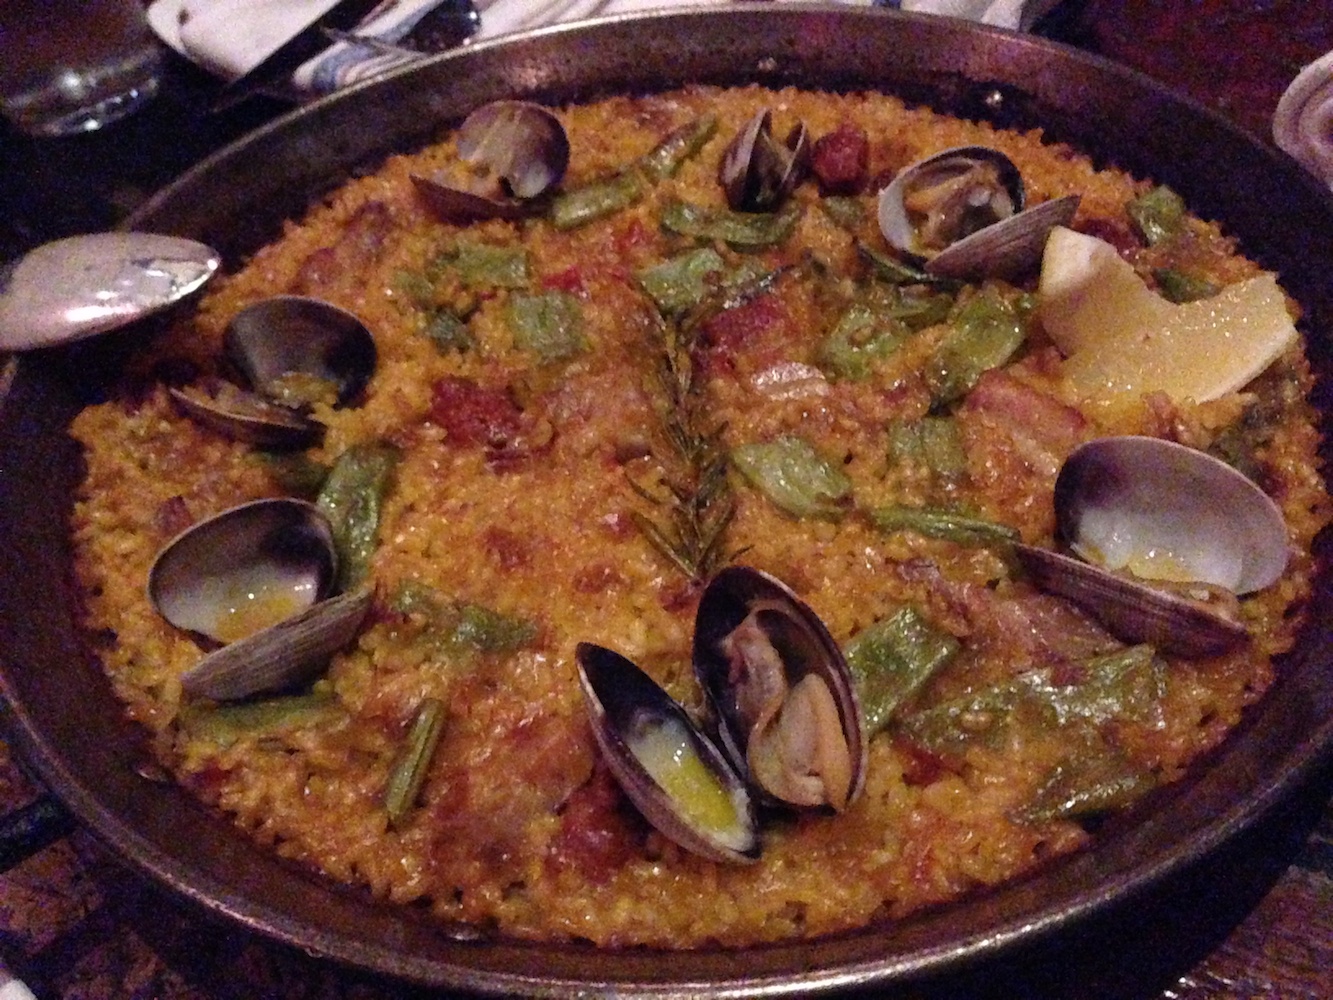 Duende’s Paella Carne with pork belly and rosemary. Photo: Angela Johnston